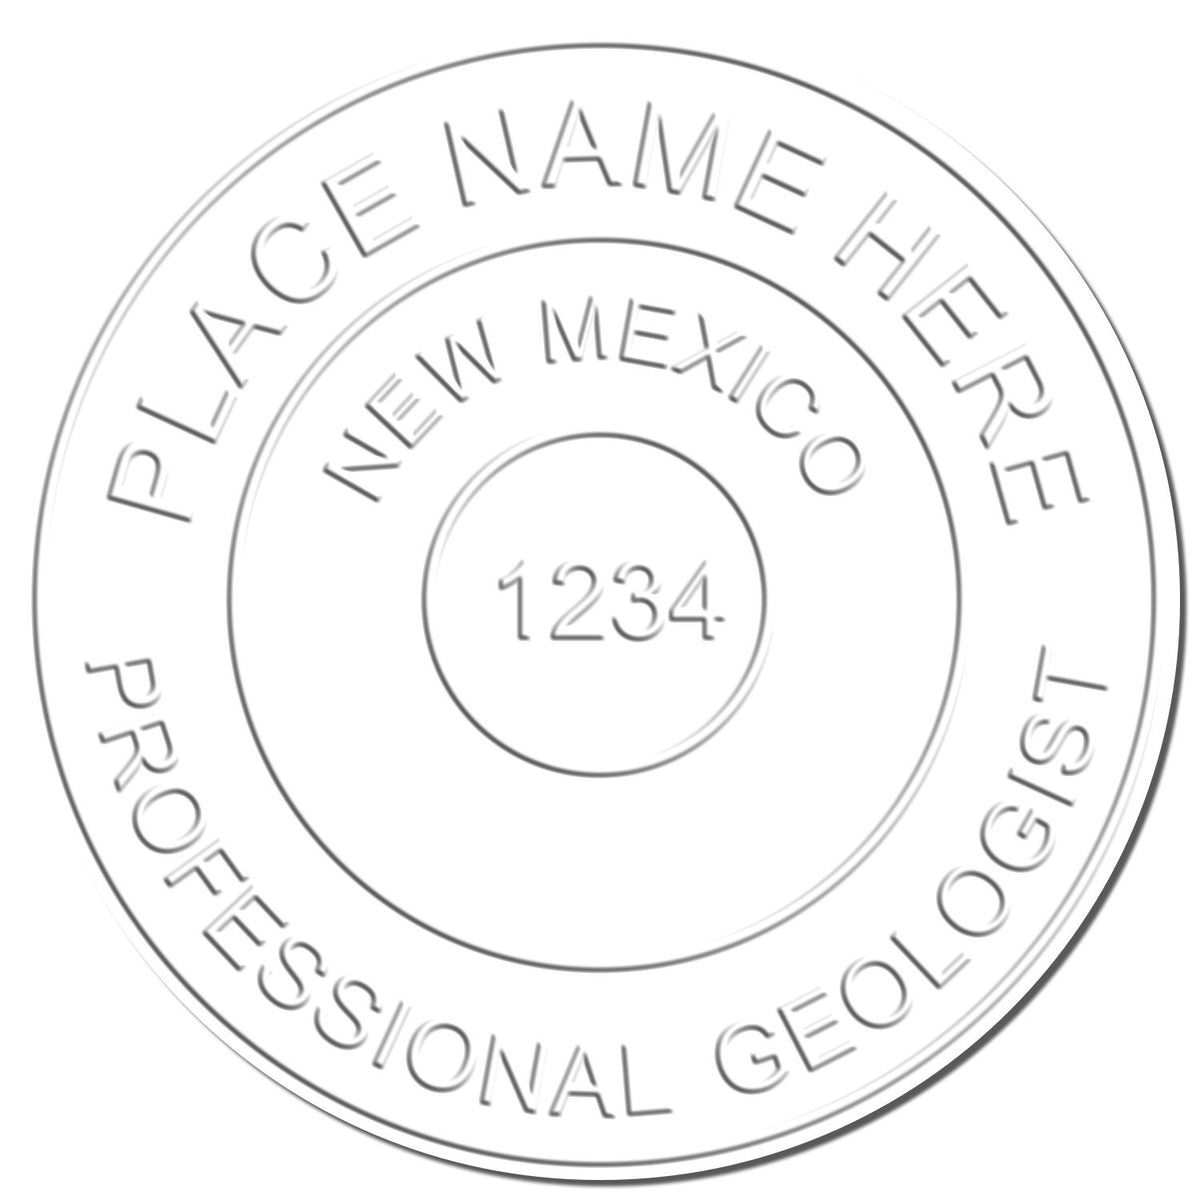 A photograph of the State of New Mexico Extended Long Reach Geologist Seal stamp impression reveals a vivid, professional image of the on paper.